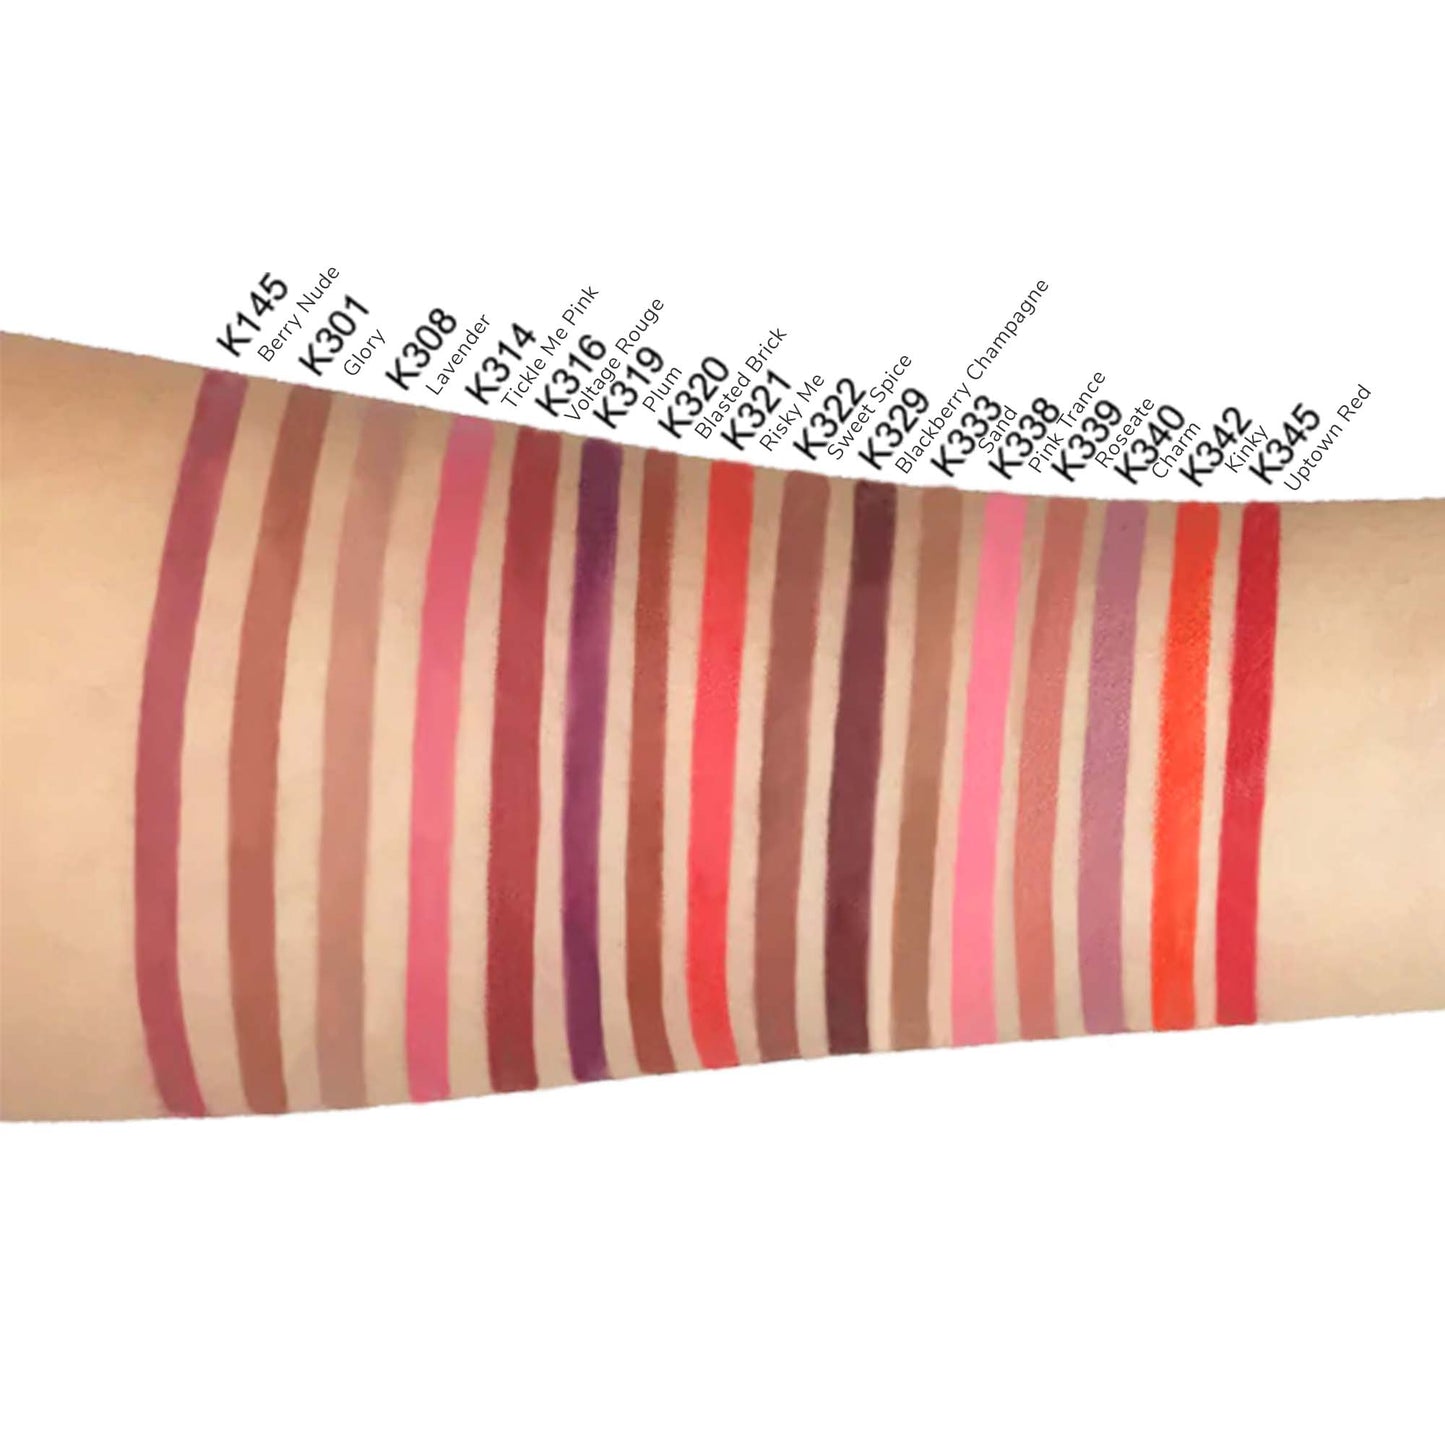 16 shades. Cruisin Organics Pink Trance Lip Pencil, the perfect complement to any lipstick, gloss, or liquid lips.